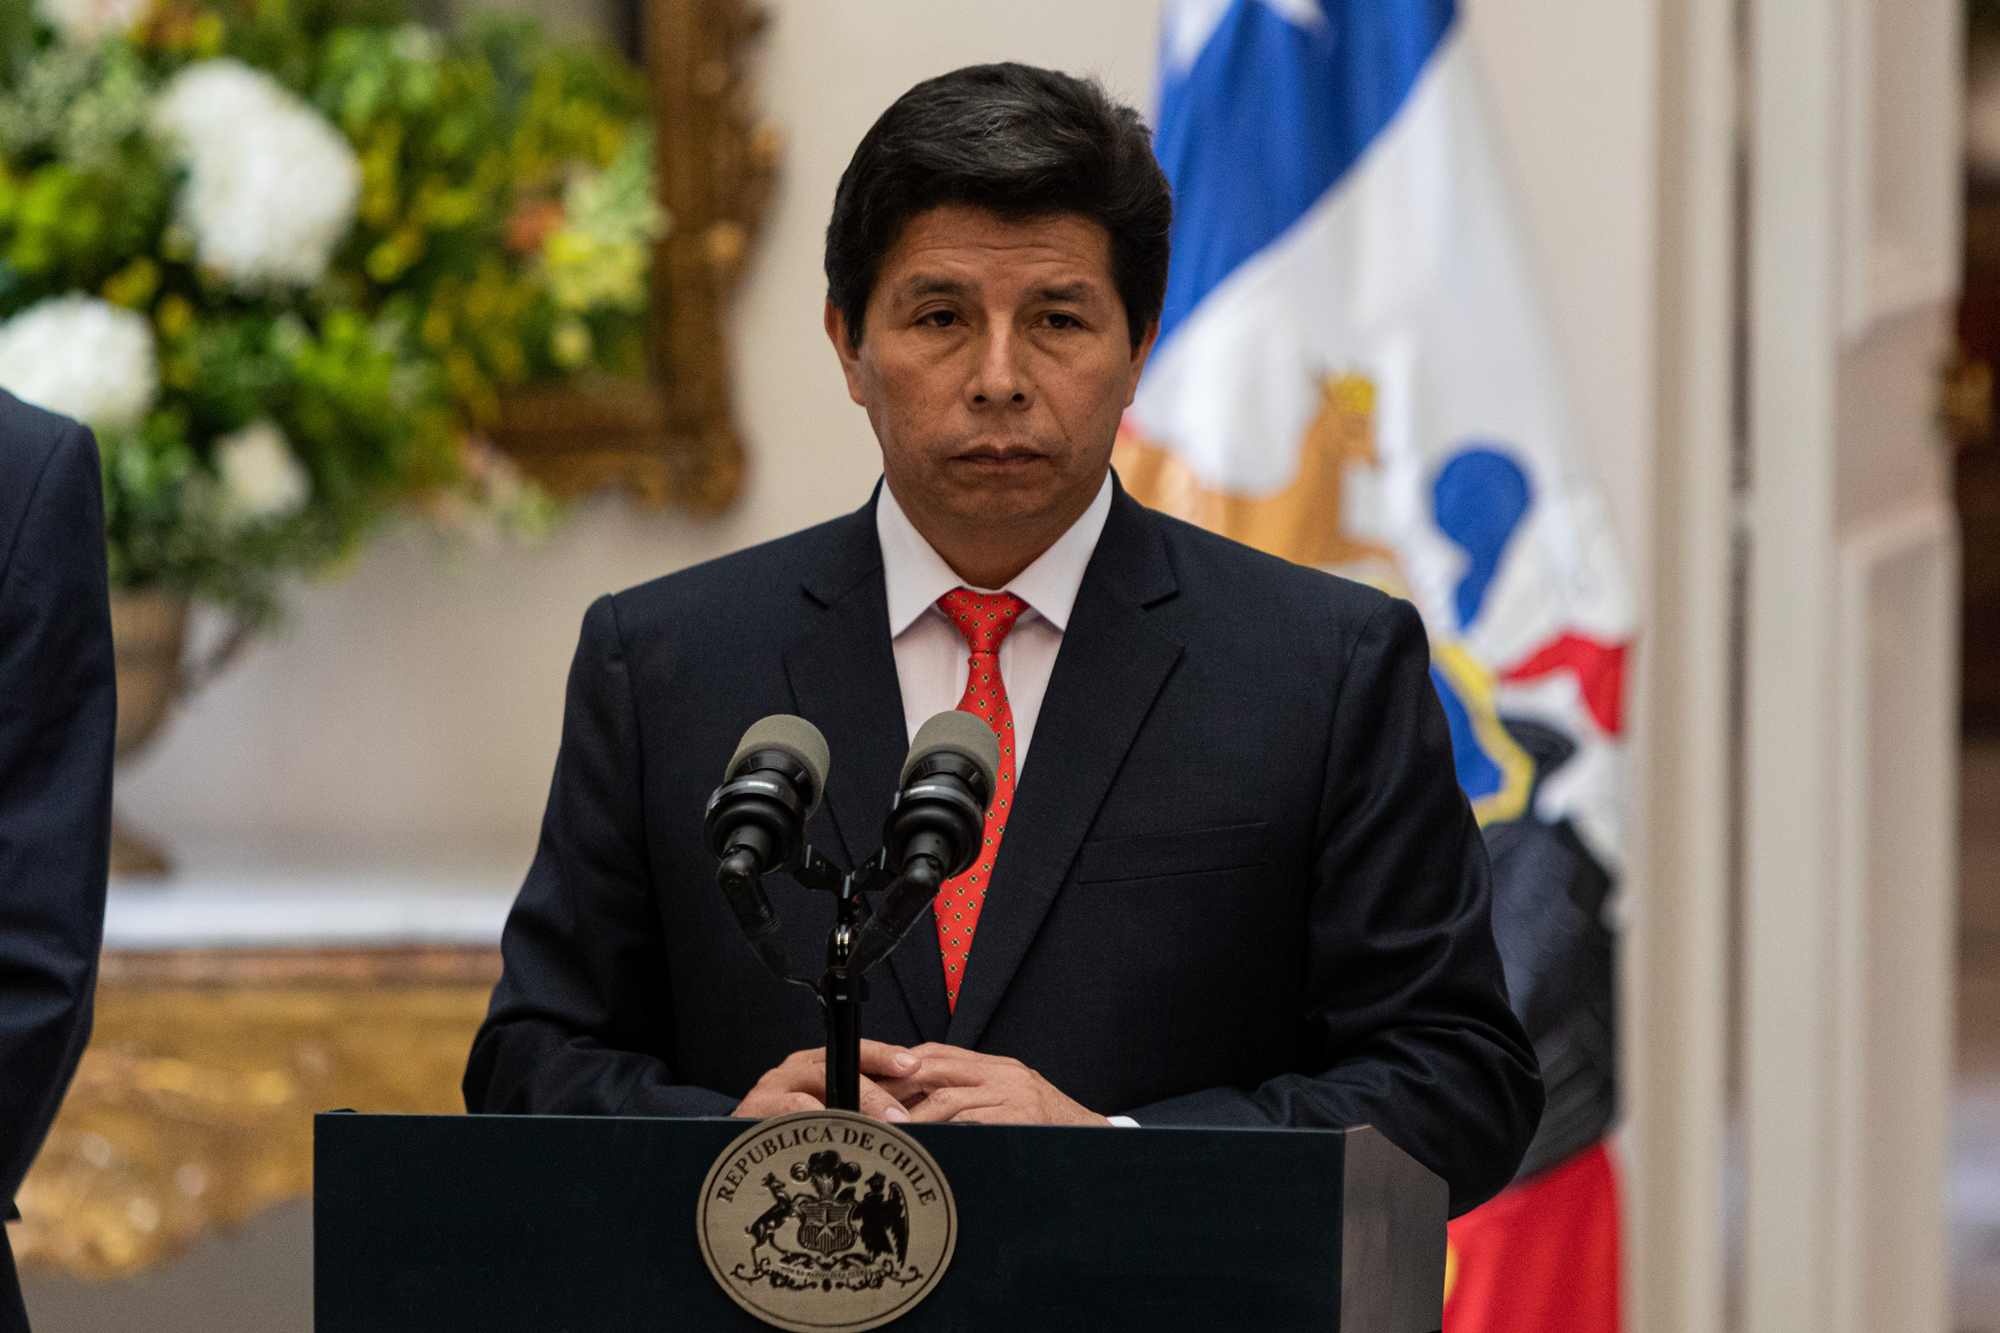 Pedro Castillo holds a press conference at the La Moneda presidential palace in Santiago, Chile on November 29.